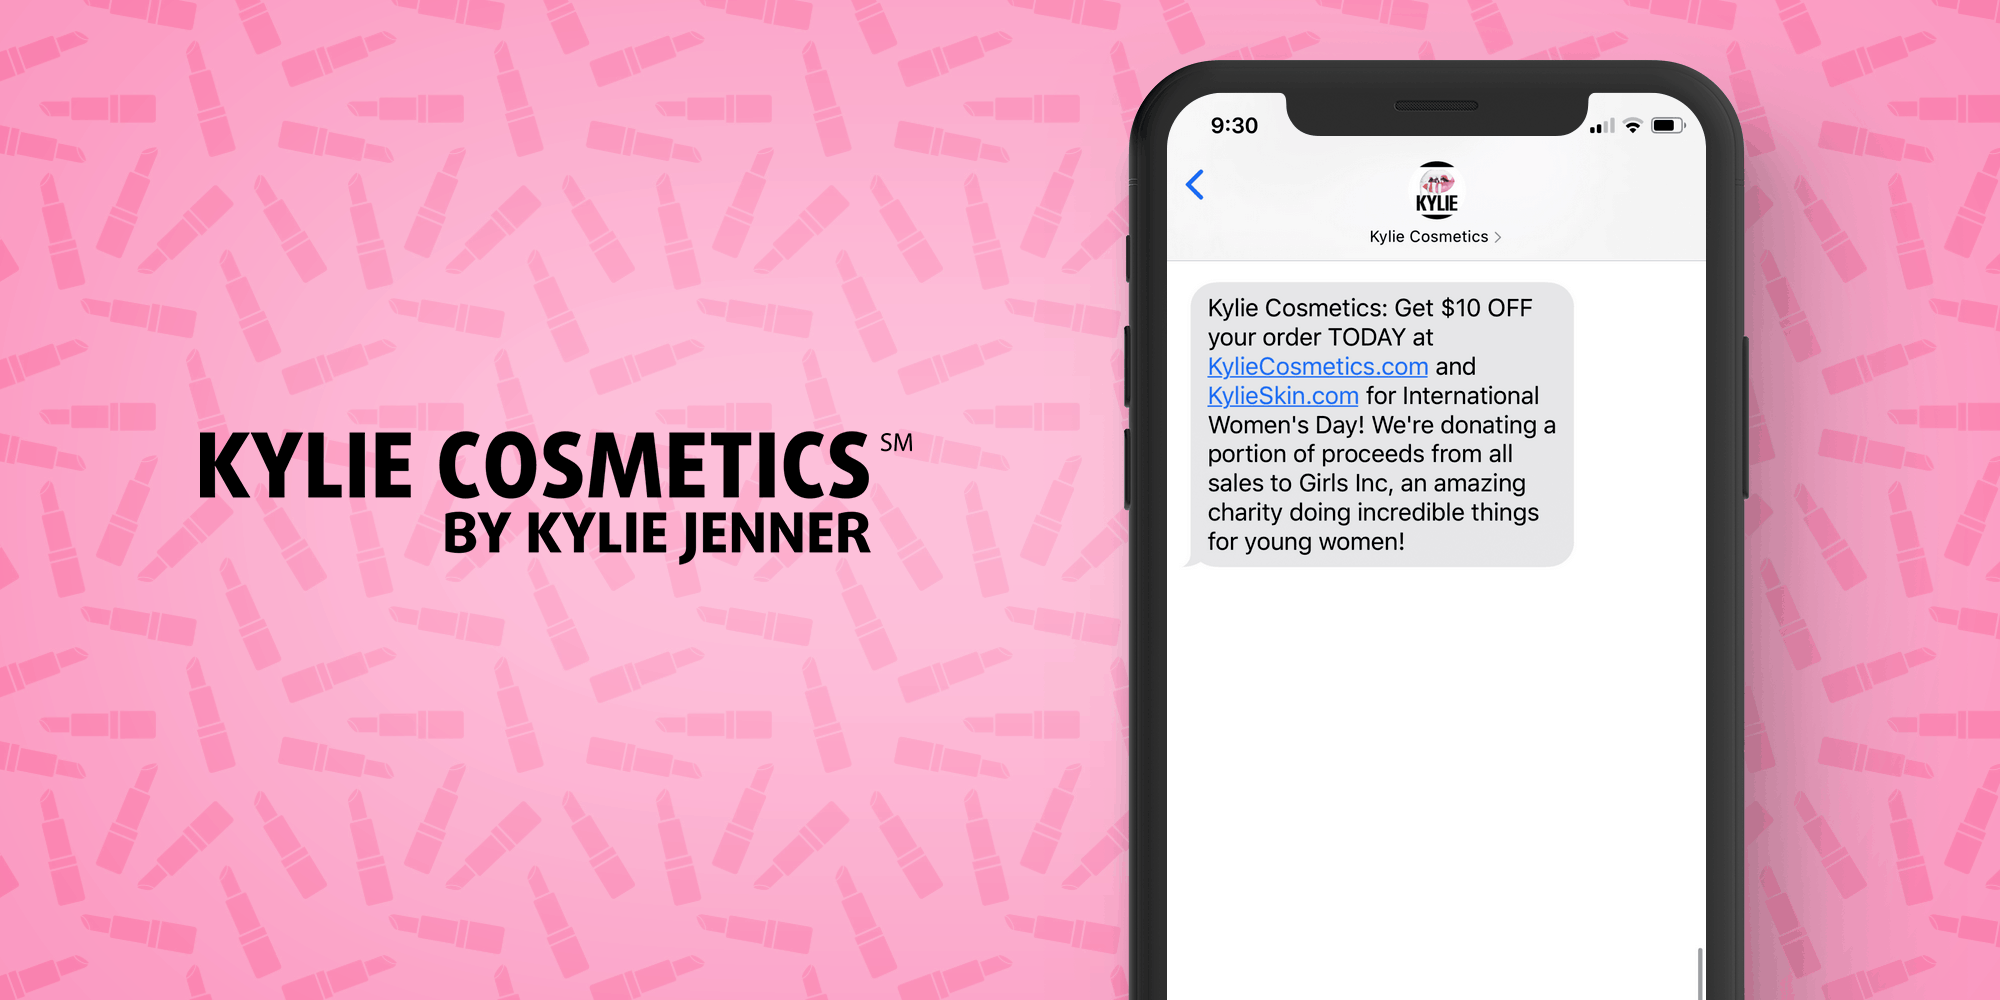 Kylie Cosmetics SMS Marketing Example - 50 Examples of Brands Using SMS Marketing